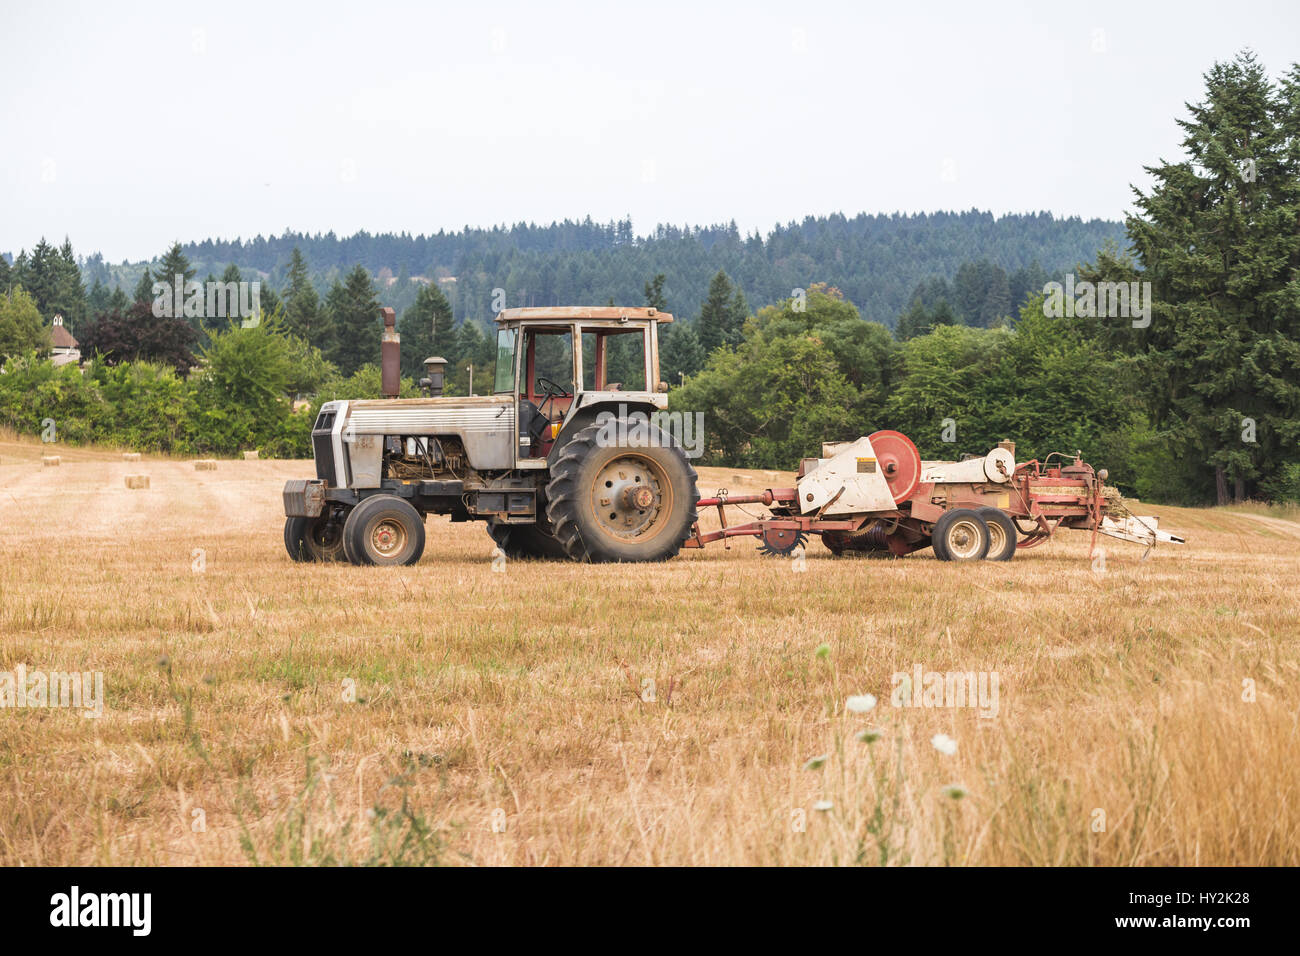 Antique or vintage tractor with heavy equipment attached in a field in rural Oregon, USA. Stock Photo